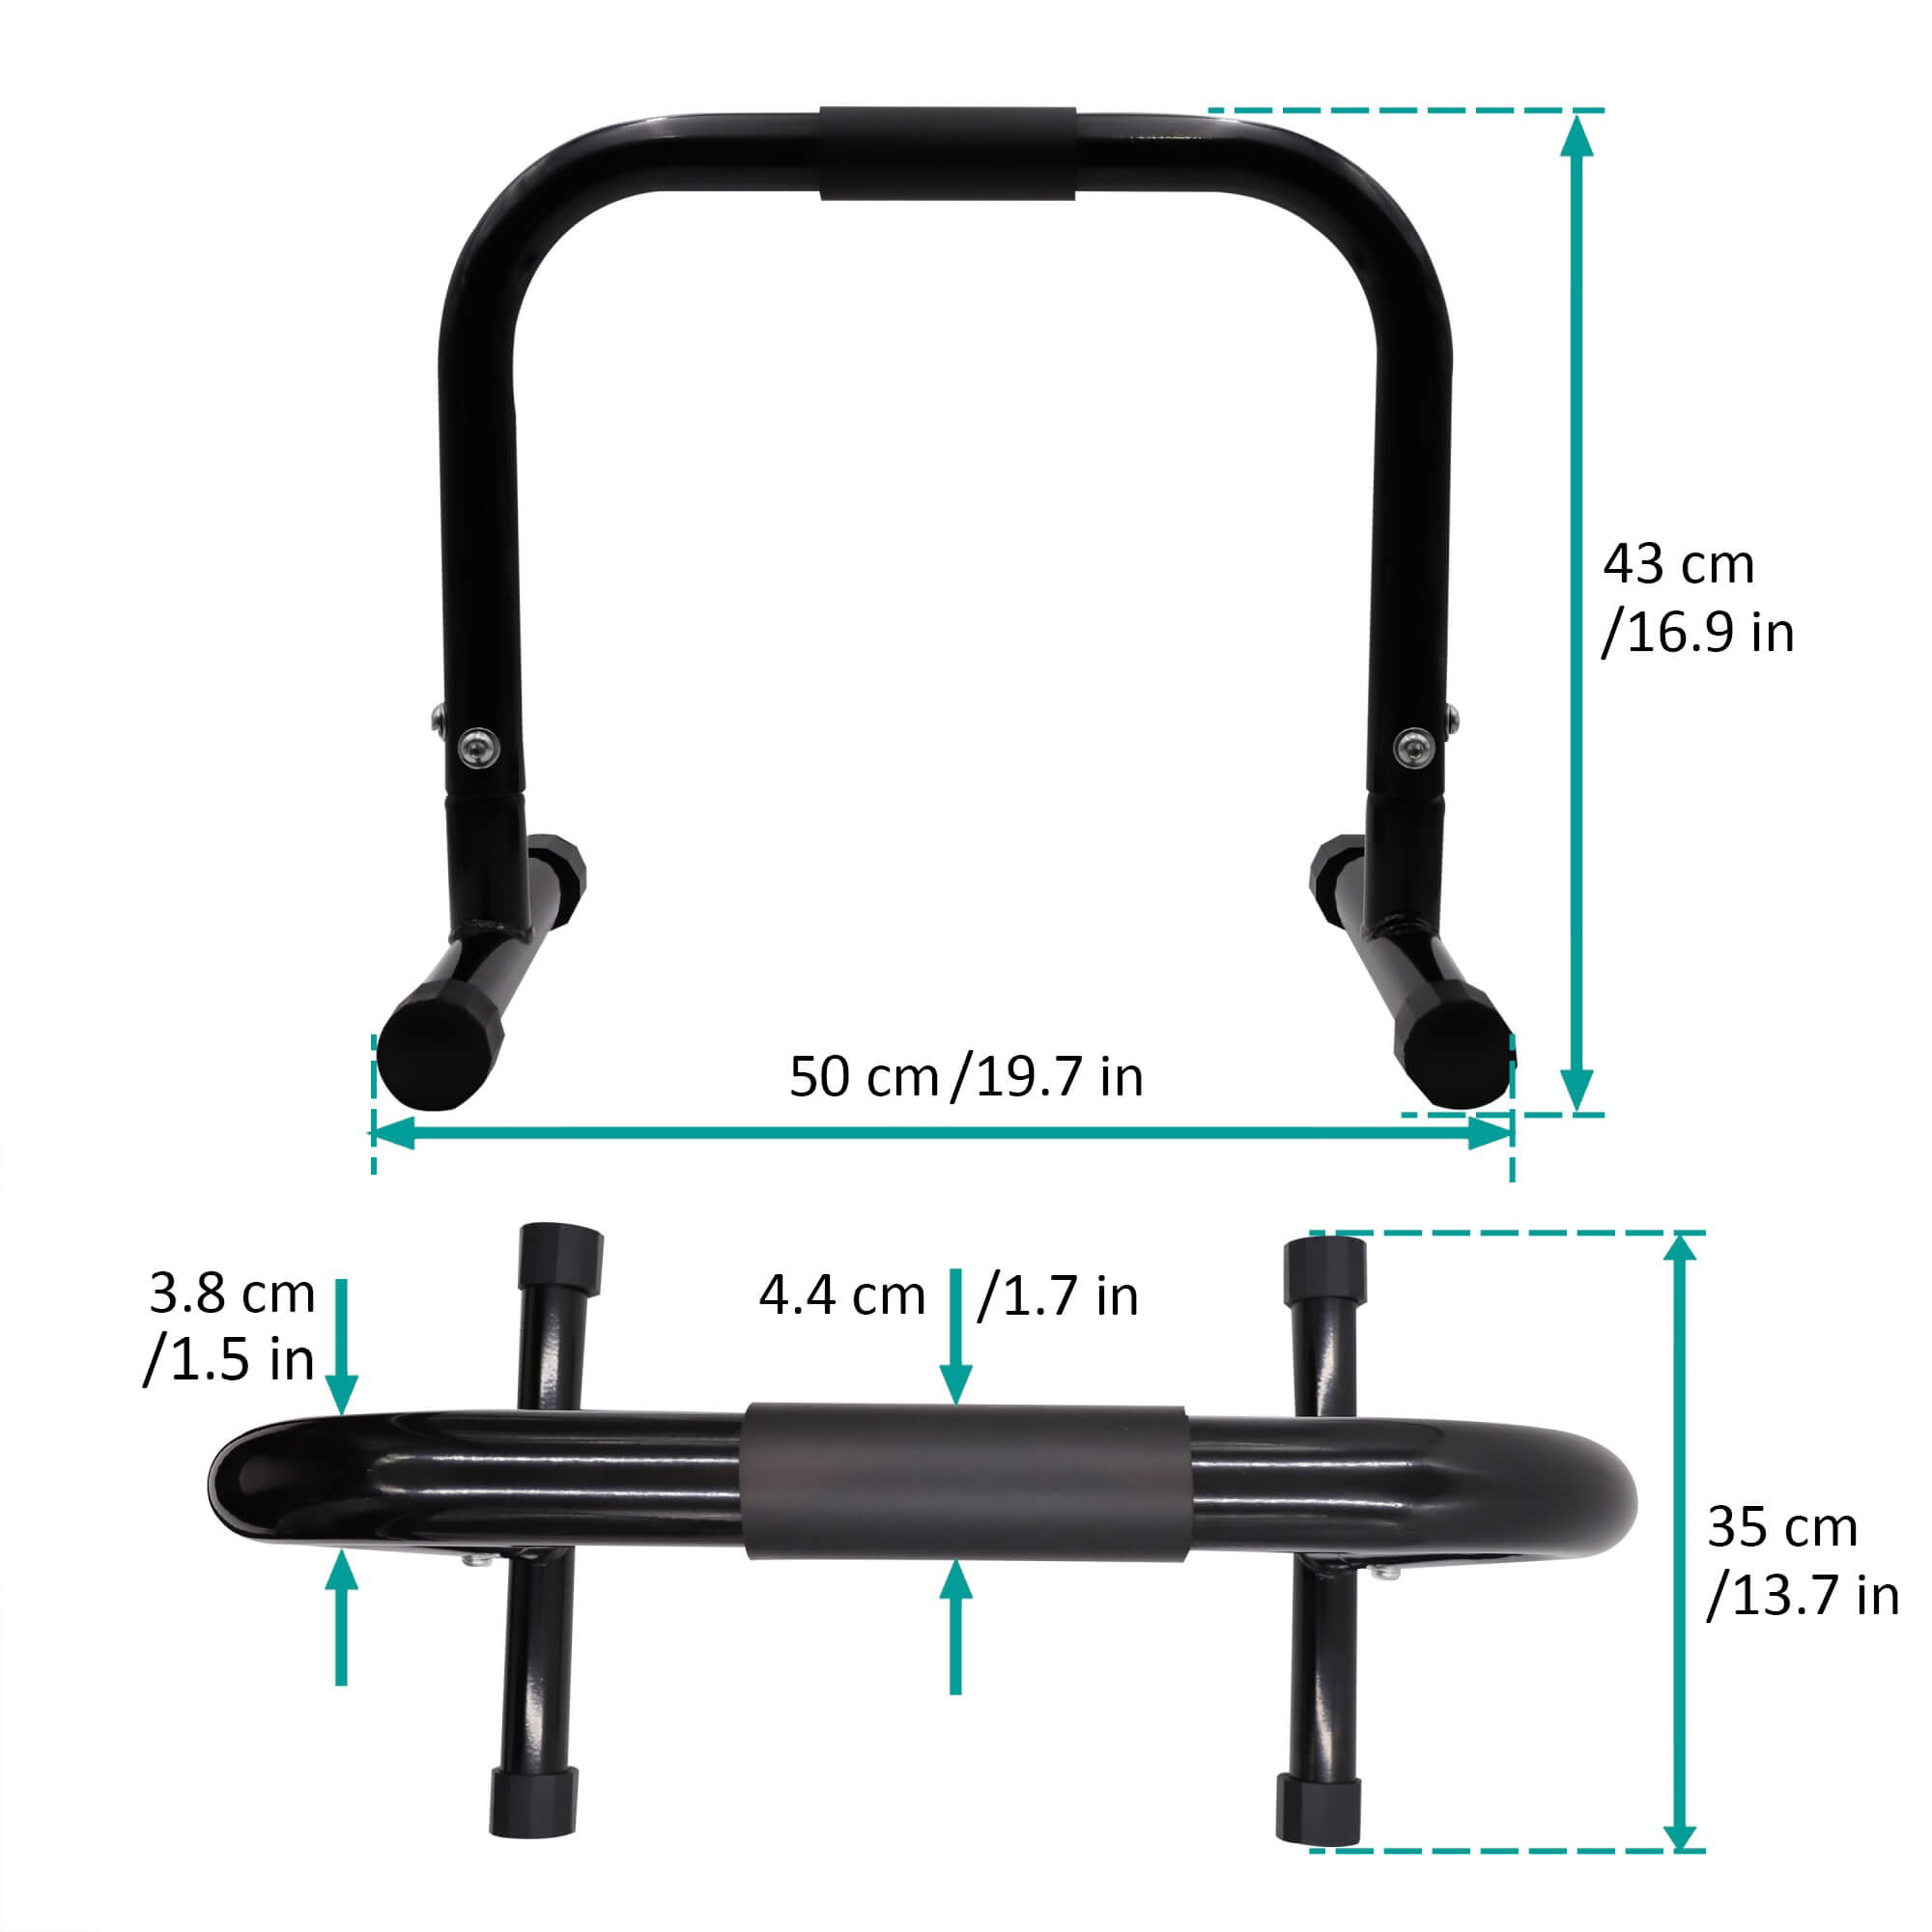 Steel parallettes, extra wide handle & non-slip